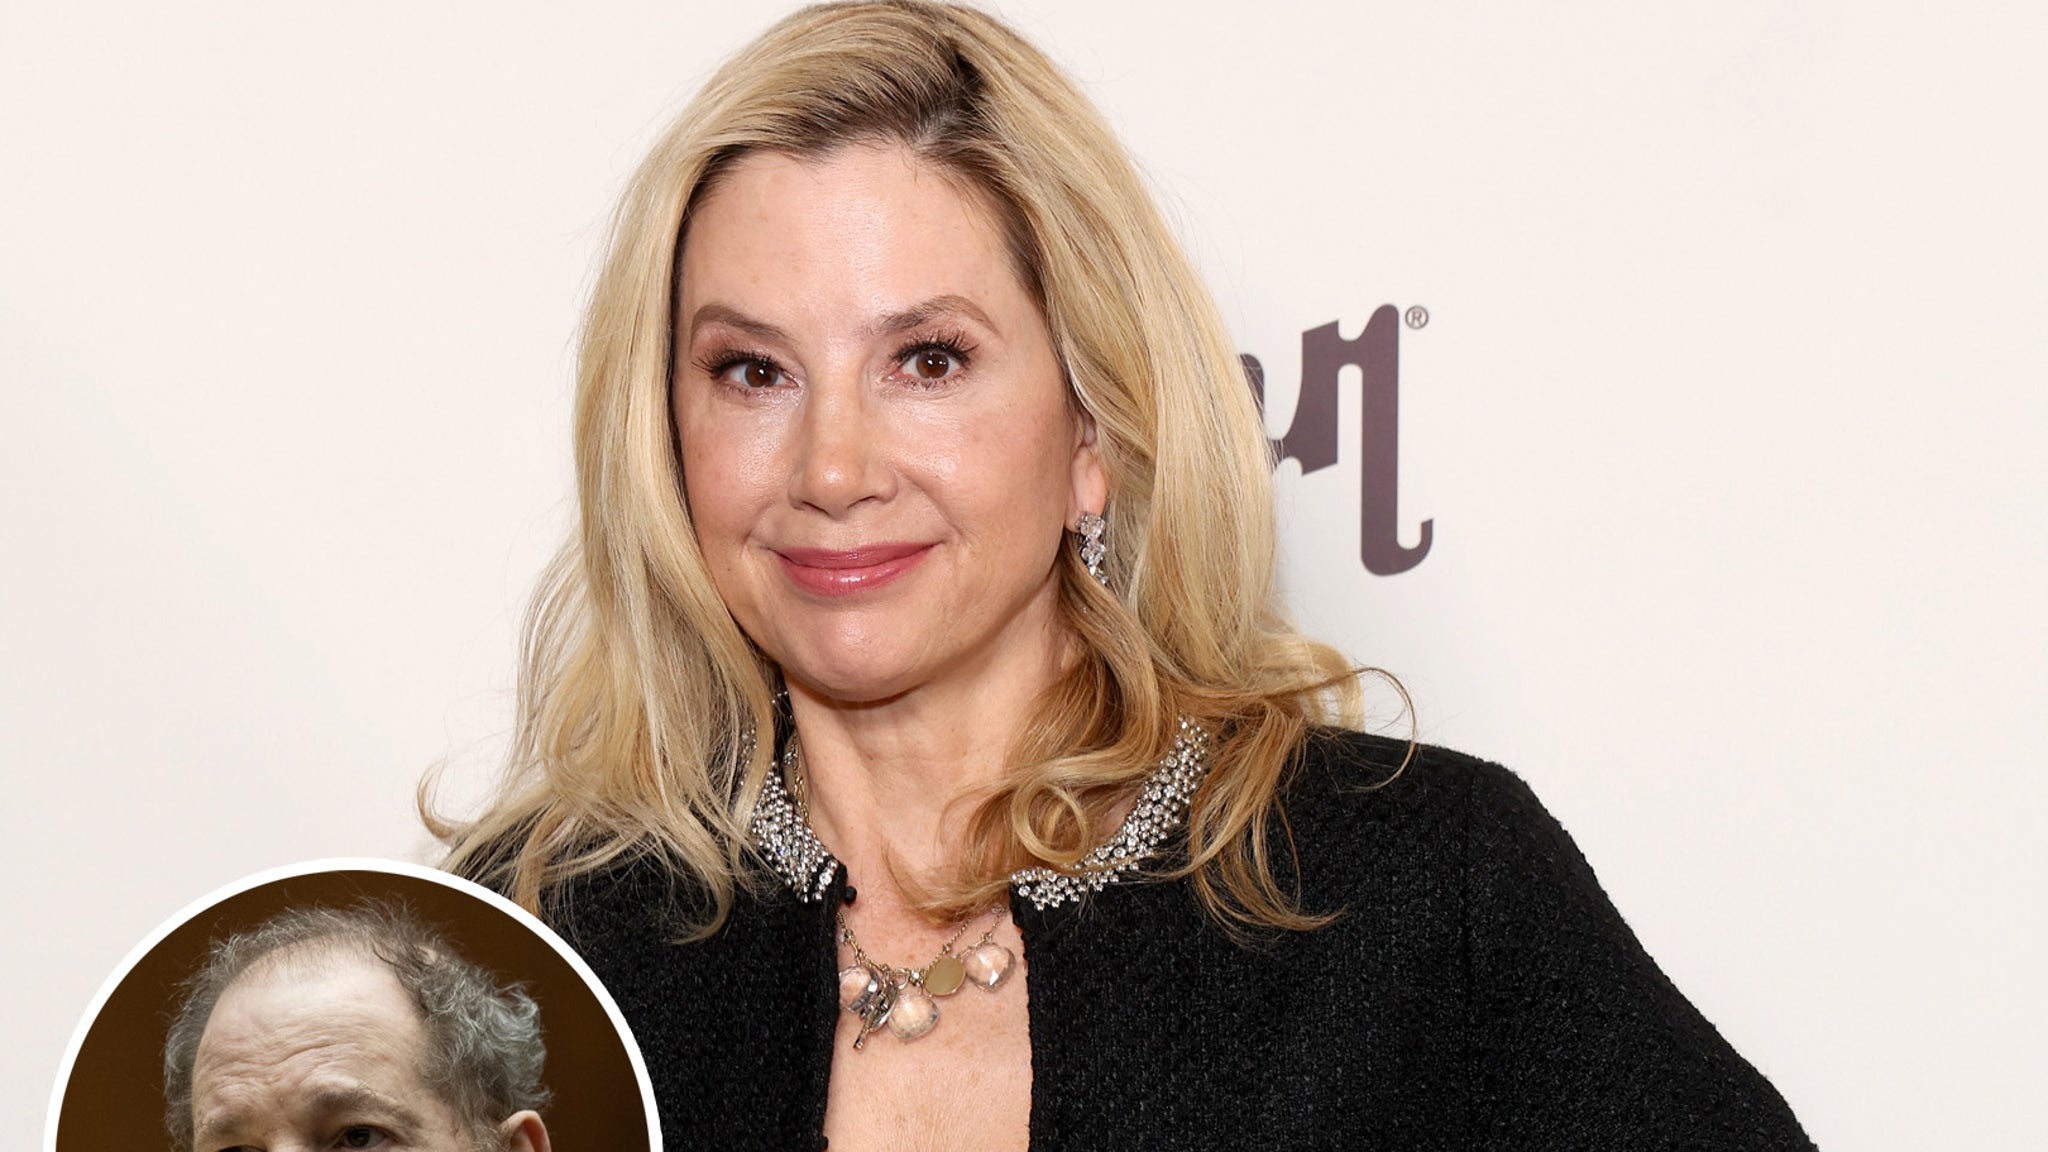 Mira Sorvino Gets Emotional Recalling How Harvey Weinstein 'Stifled' Career: 'I Stopped Being A Viable Actress'